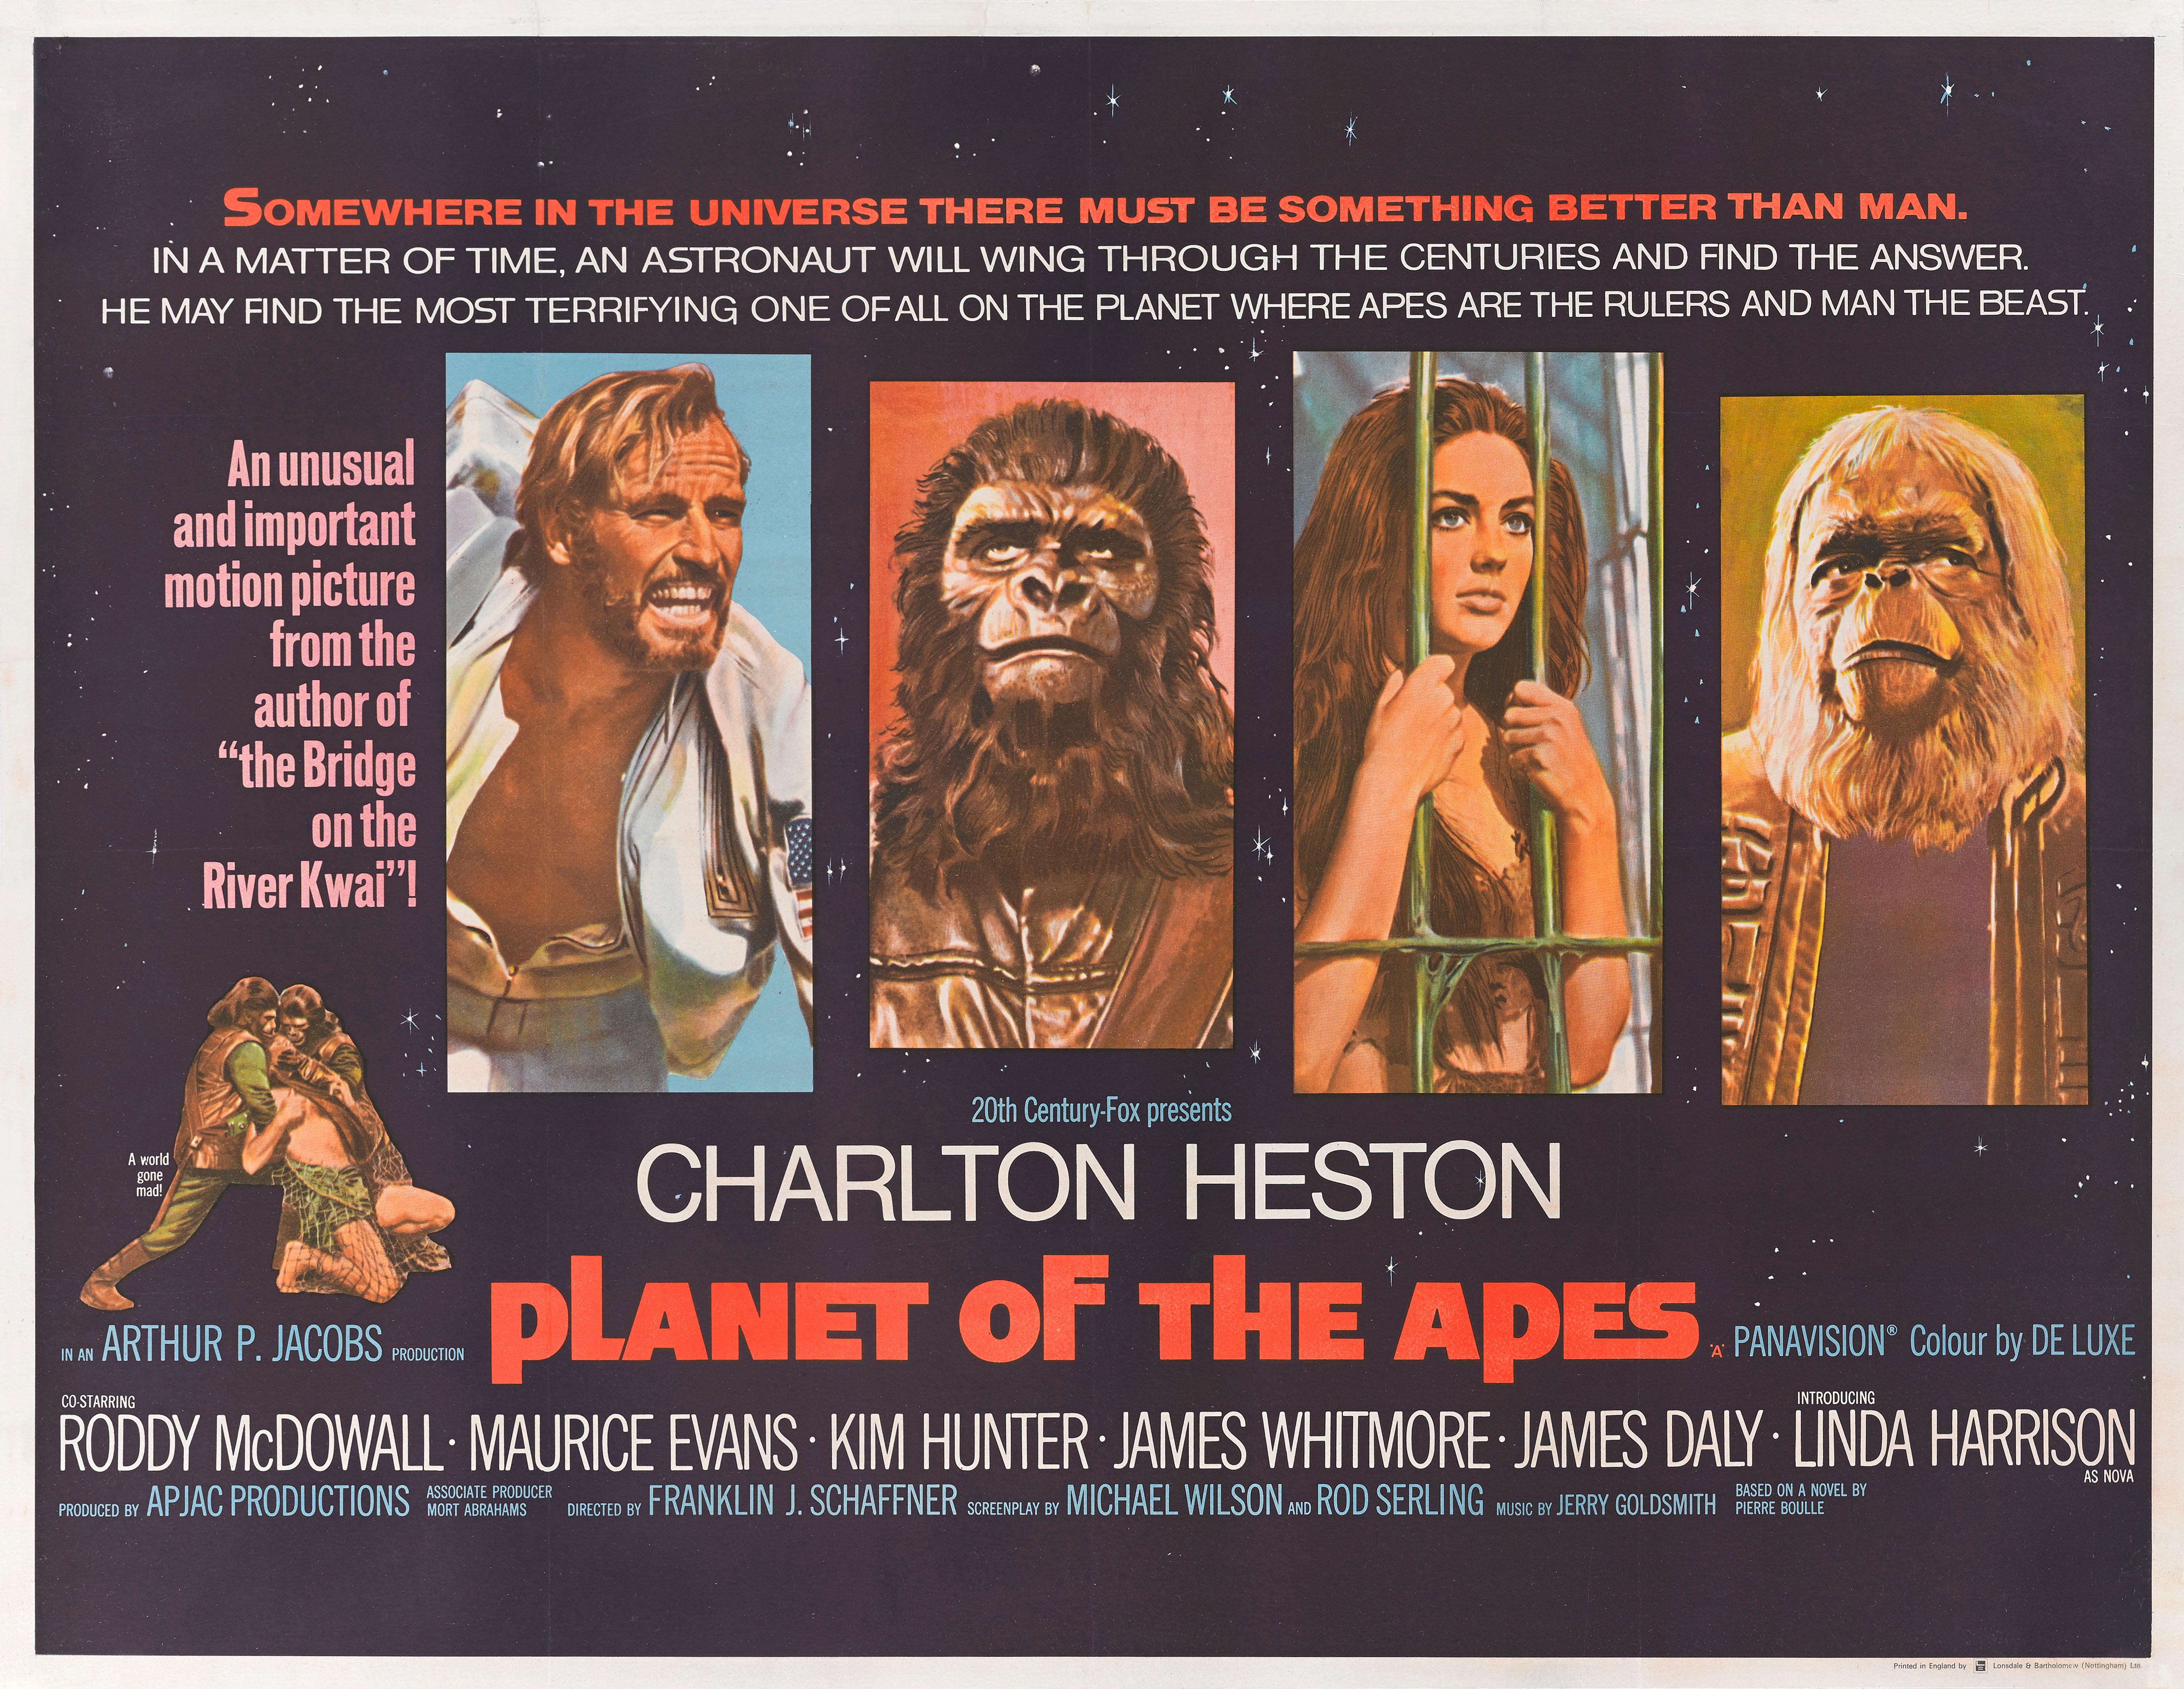 Original British film poster for the first Planet of the Apes movie in 1968.
The British poster is the best looking one on this title. This cult sci-fi film was directed by Franklin J. Schaffner, and stars Charlton Heston. It was a hugely